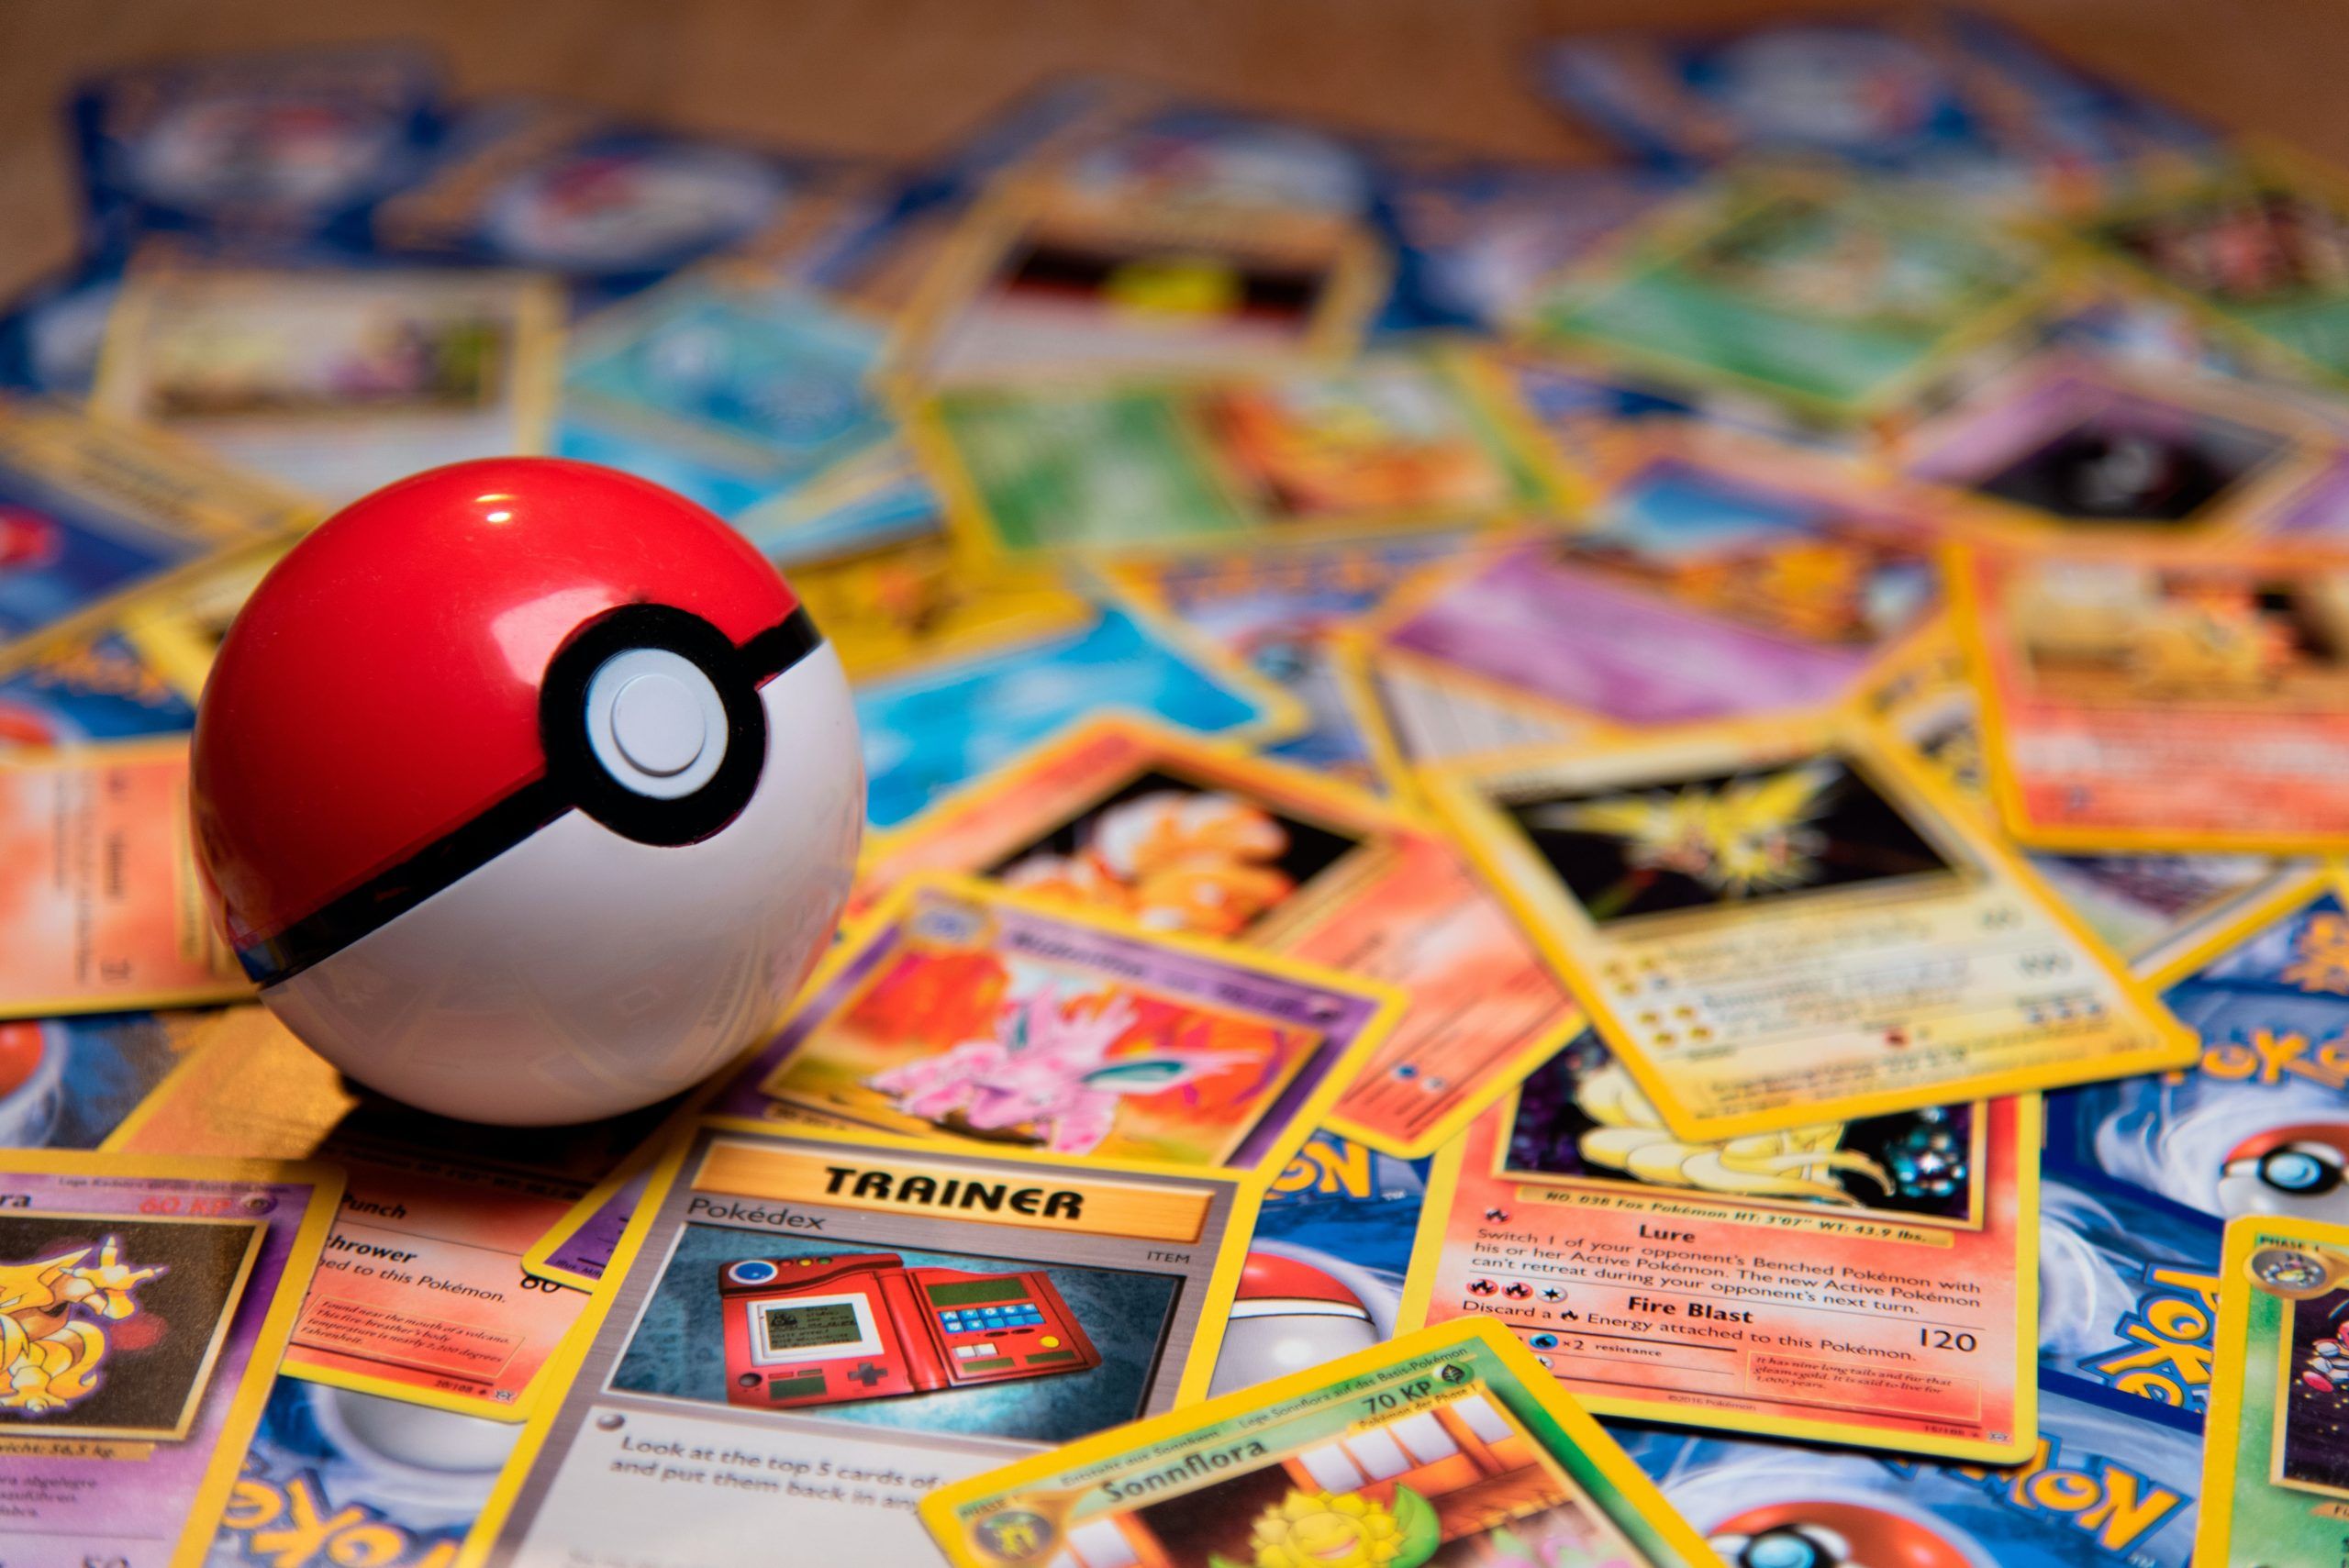 12 Most Valuable Pokemon Cards in the World, Their Prices Are